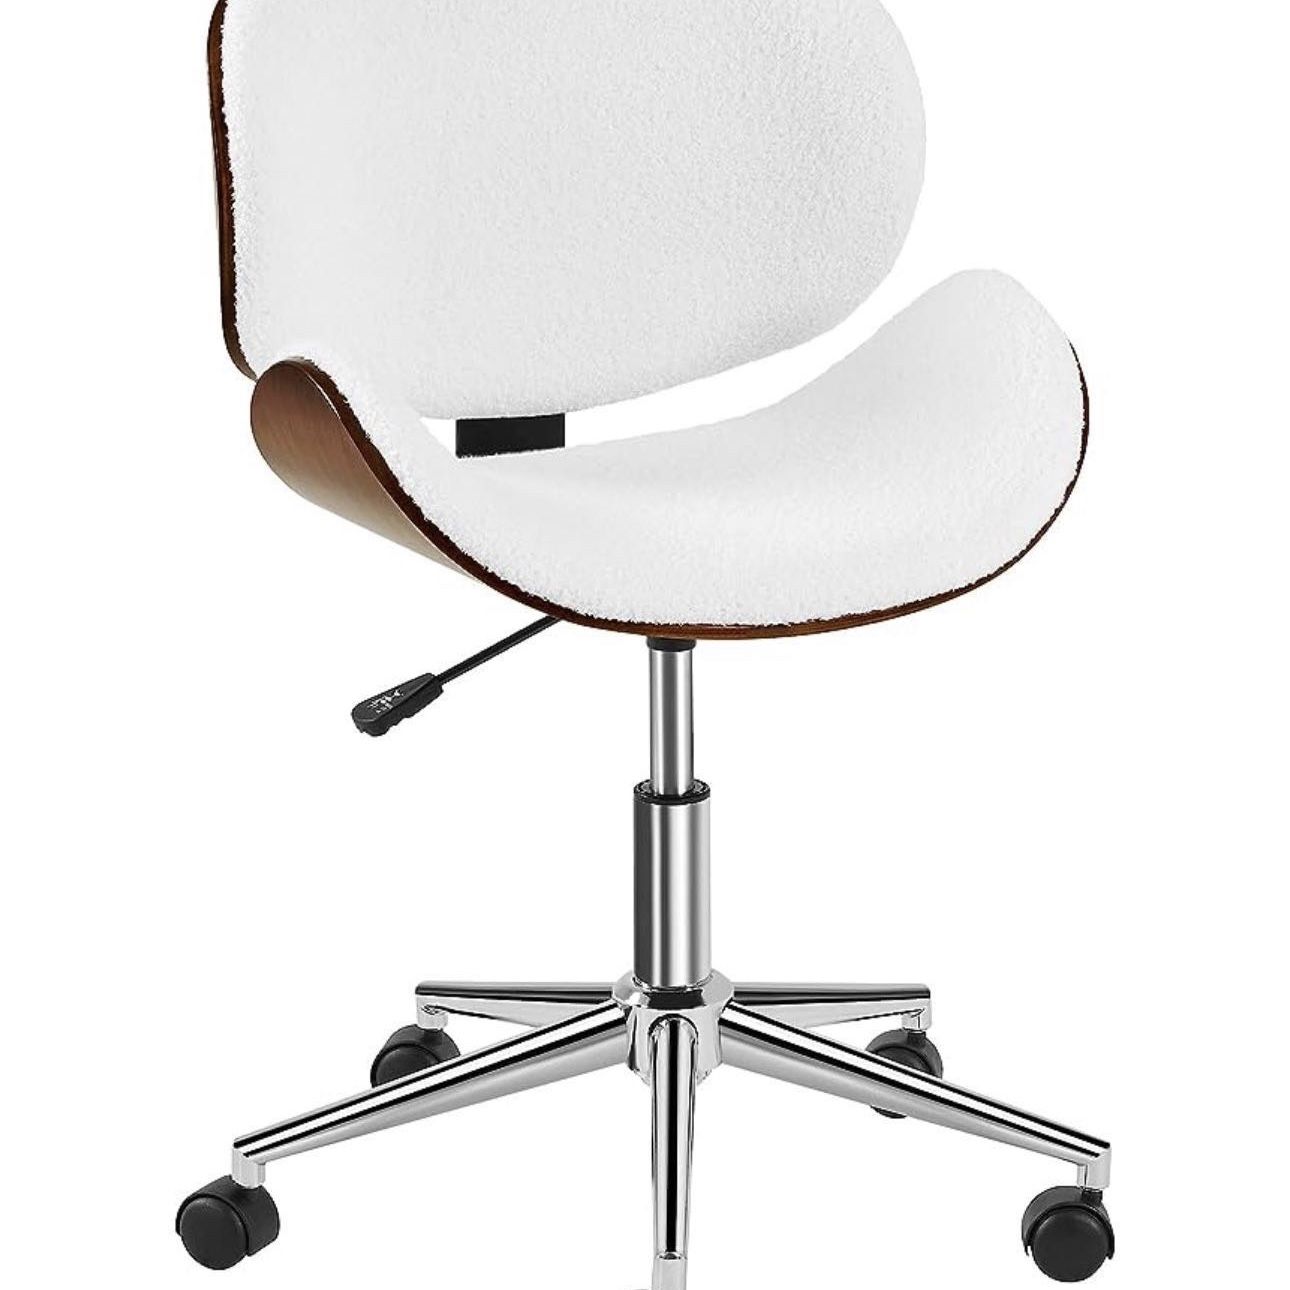 Ergonomic Desk Chair Armless Office Chair Mid-Century Bentwood Seat Computer Chair Boucle Fabric Swivel Chair Height Adjustable for Bar Meeting Room H